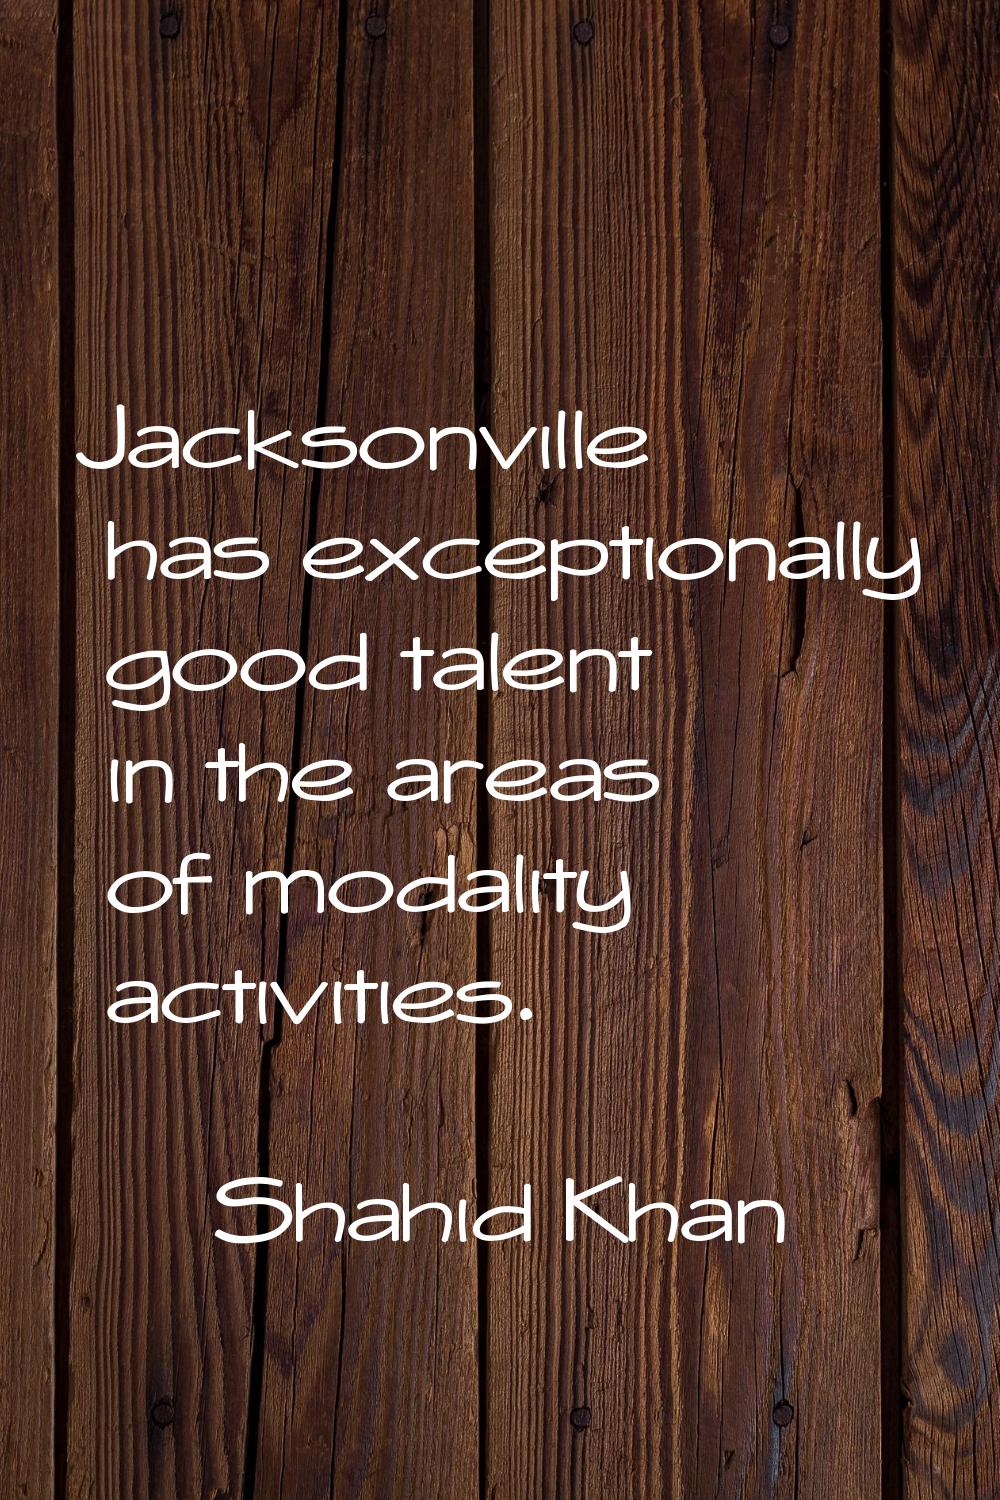 Jacksonville has exceptionally good talent in the areas of modality activities.